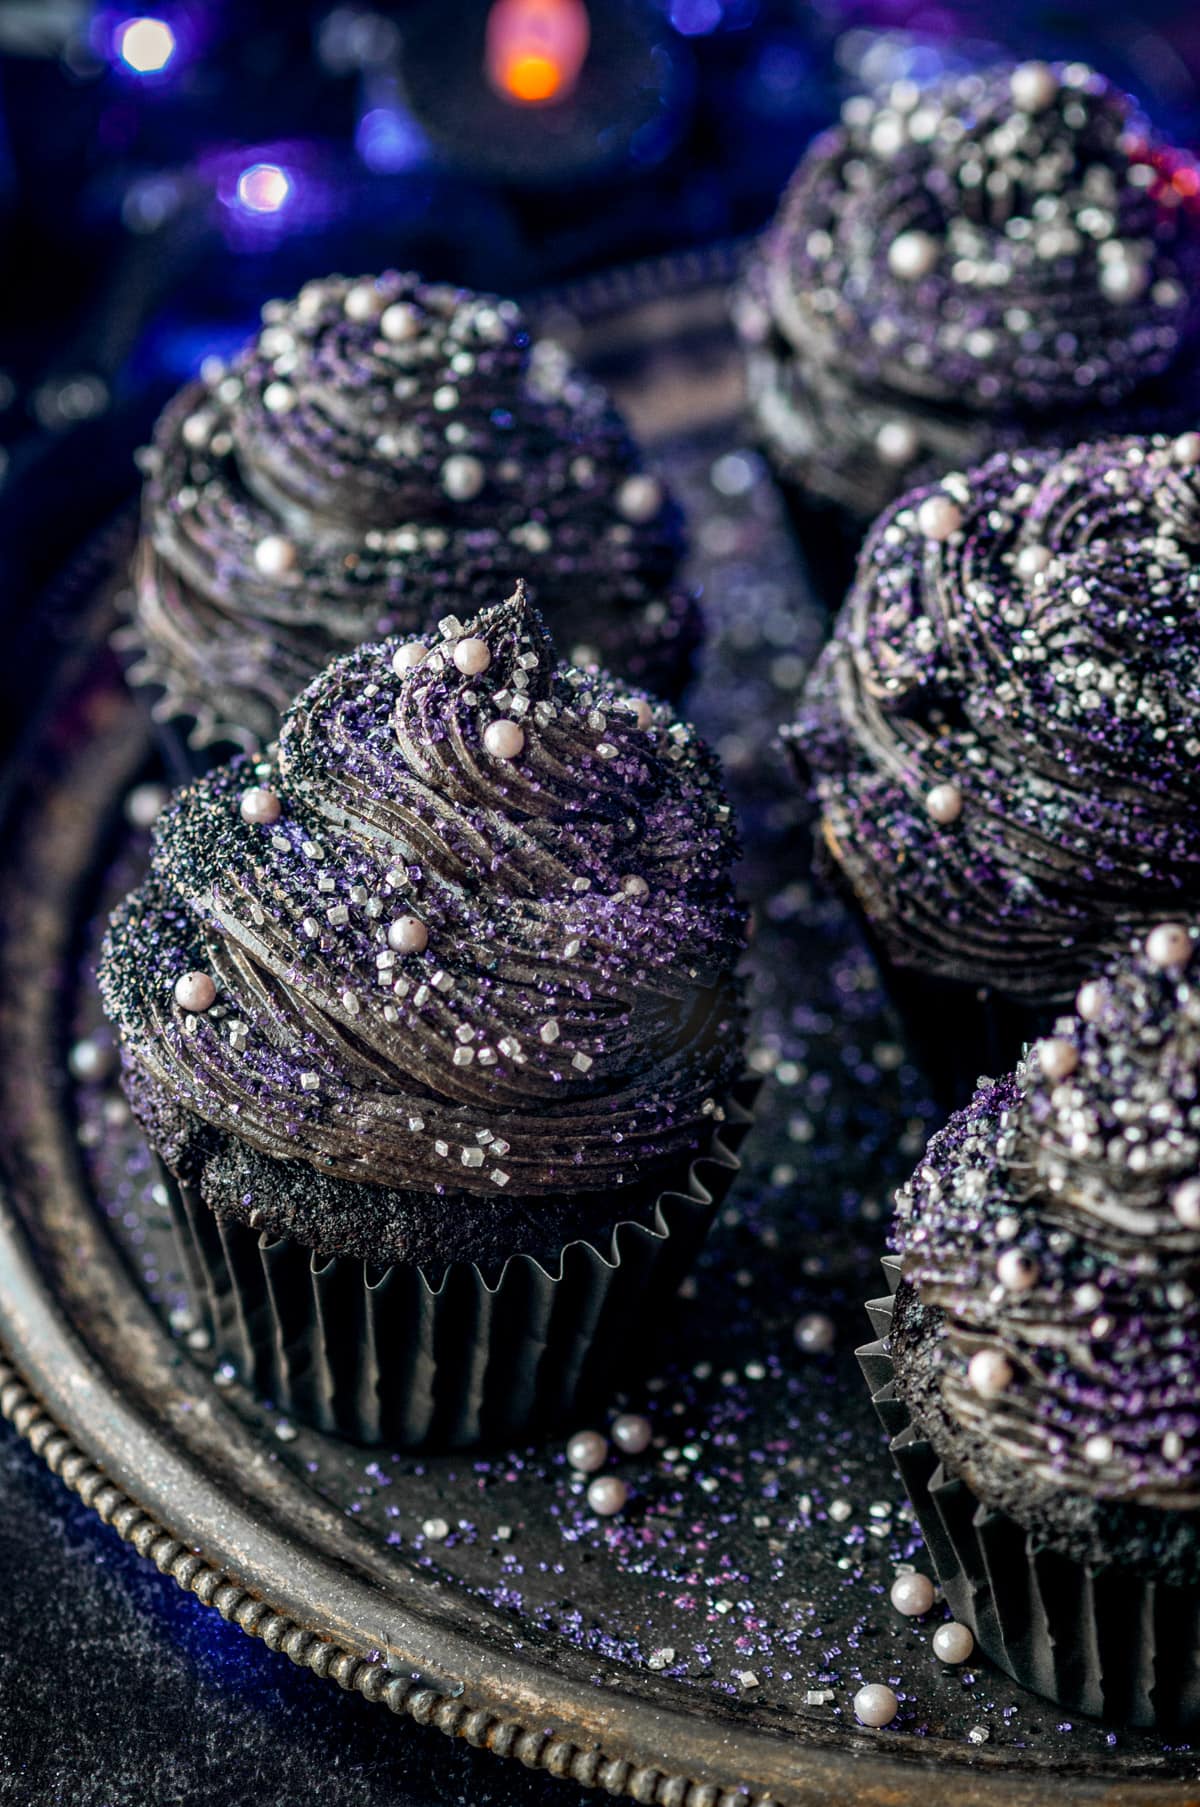 Black velvet cupcakes topped with sanding sugar and sprinkles on gray metal plate with purple lights and candles in background.